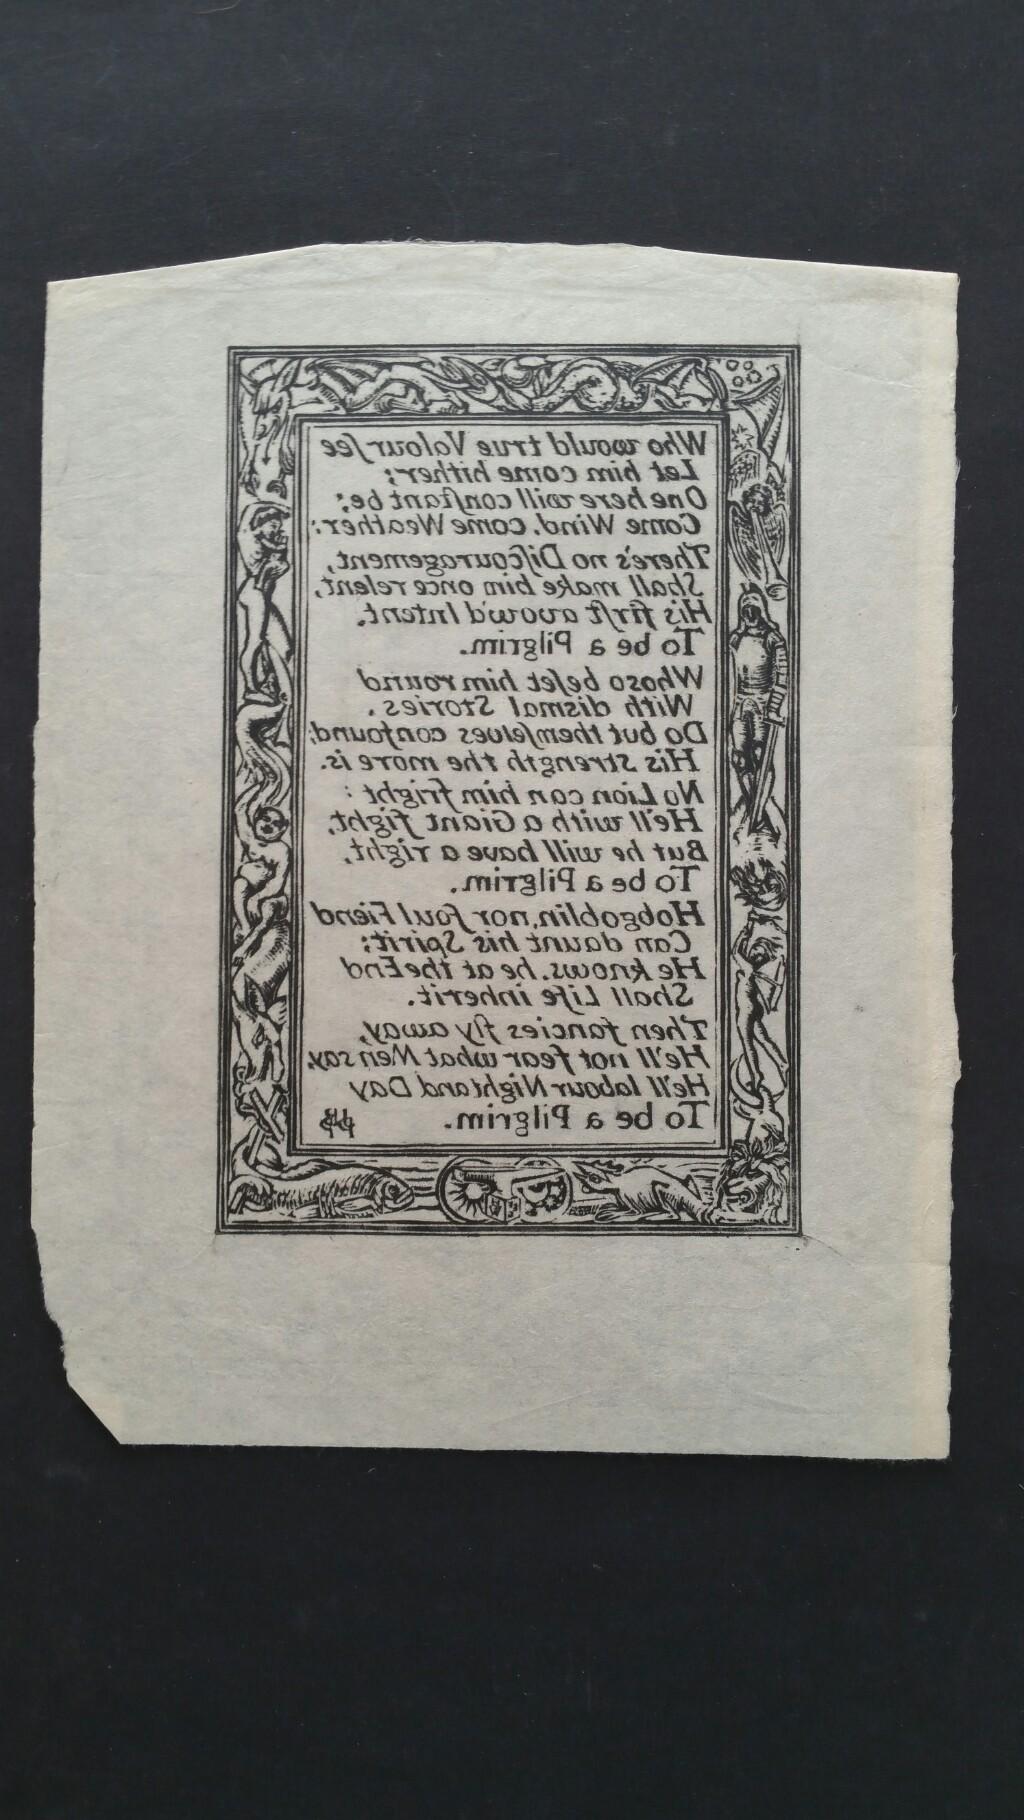 English Antique Woodcut Engraving, Inscribed, of Bunyan Hymn - Gray Print by Henry Clarence Whaite